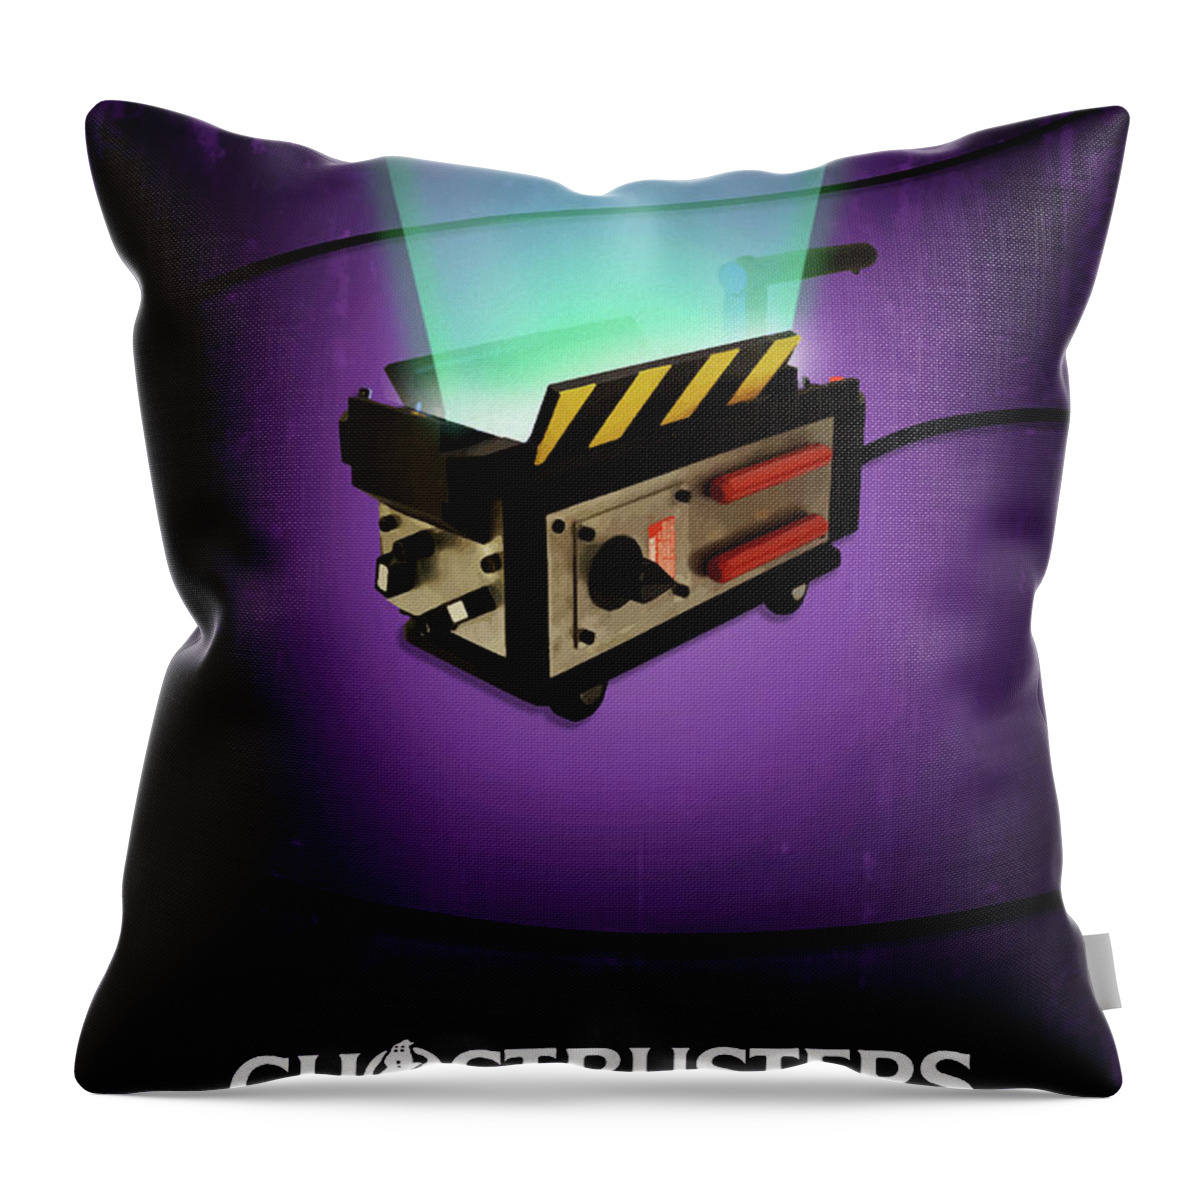 Movie Poster Throw Pillow featuring the digital art Ghostbusters by Bo Kev